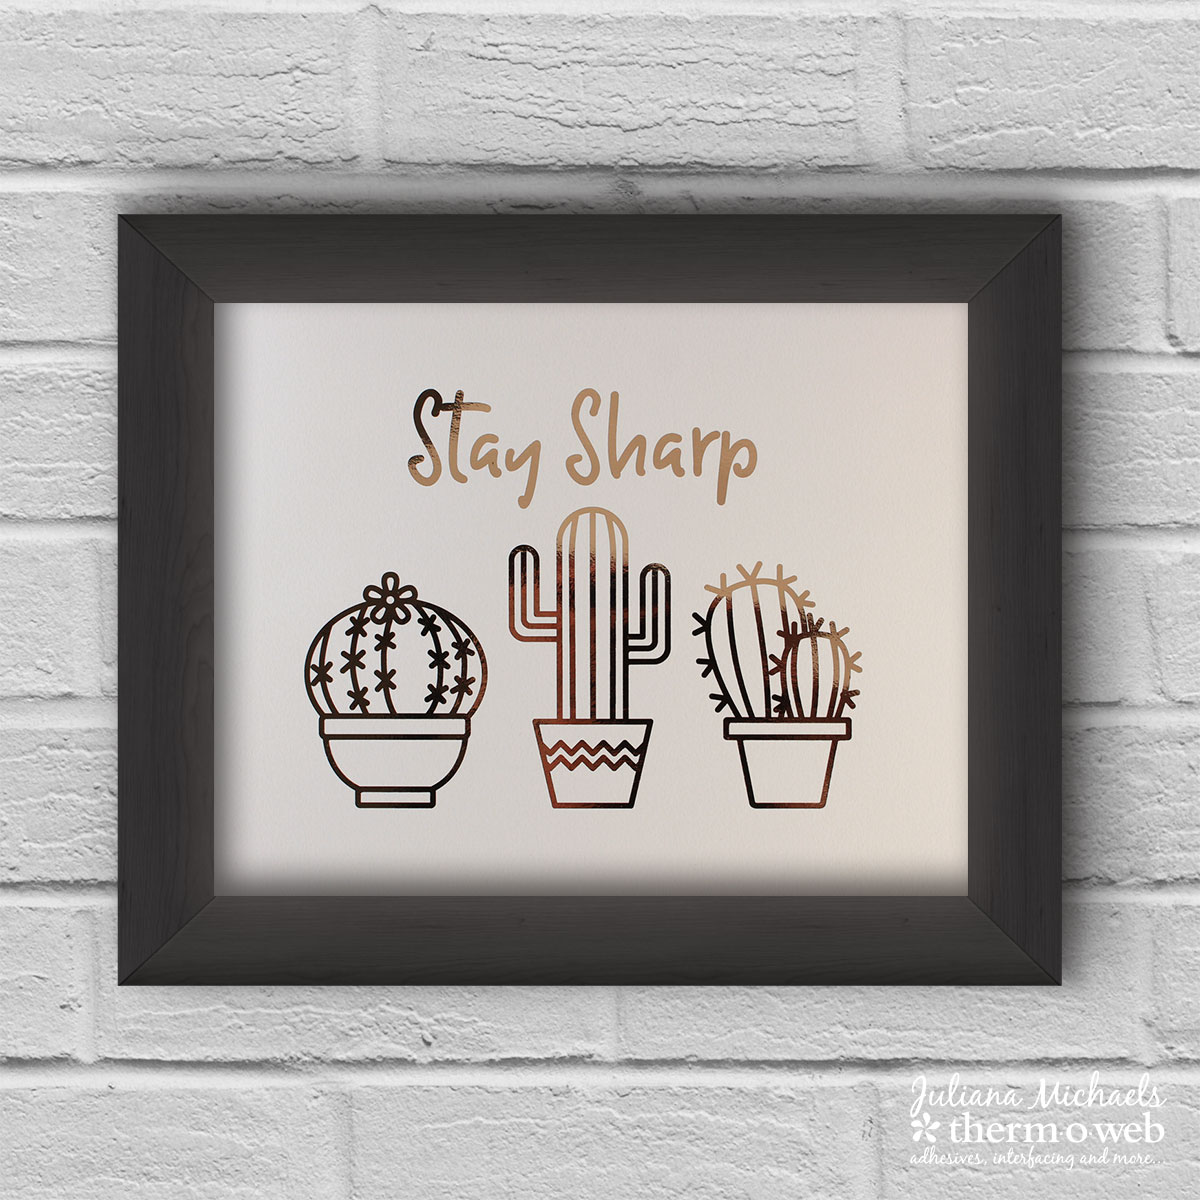 Stay Sharp Cacti Free Printable by Juliana Michaels for Therm O Web featuring Rose Gold Deco Foil